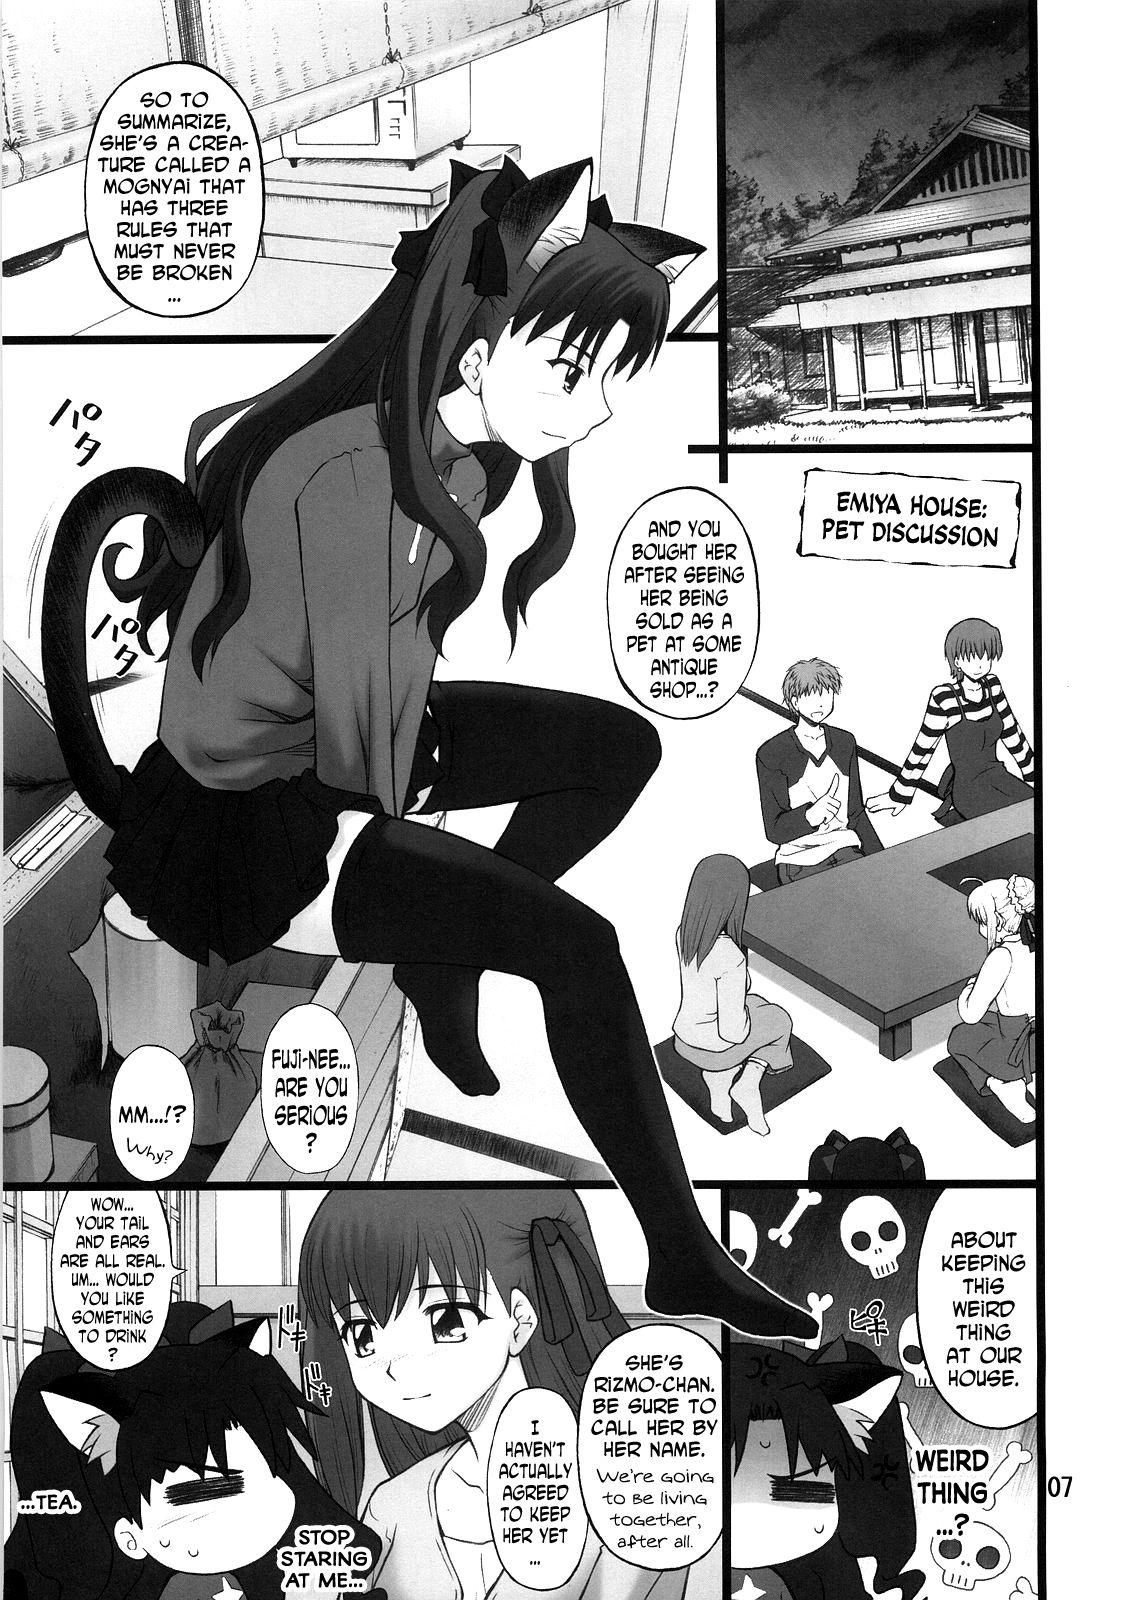 Sperm Grem-Rin 1 - Fate stay night Toys - Page 6